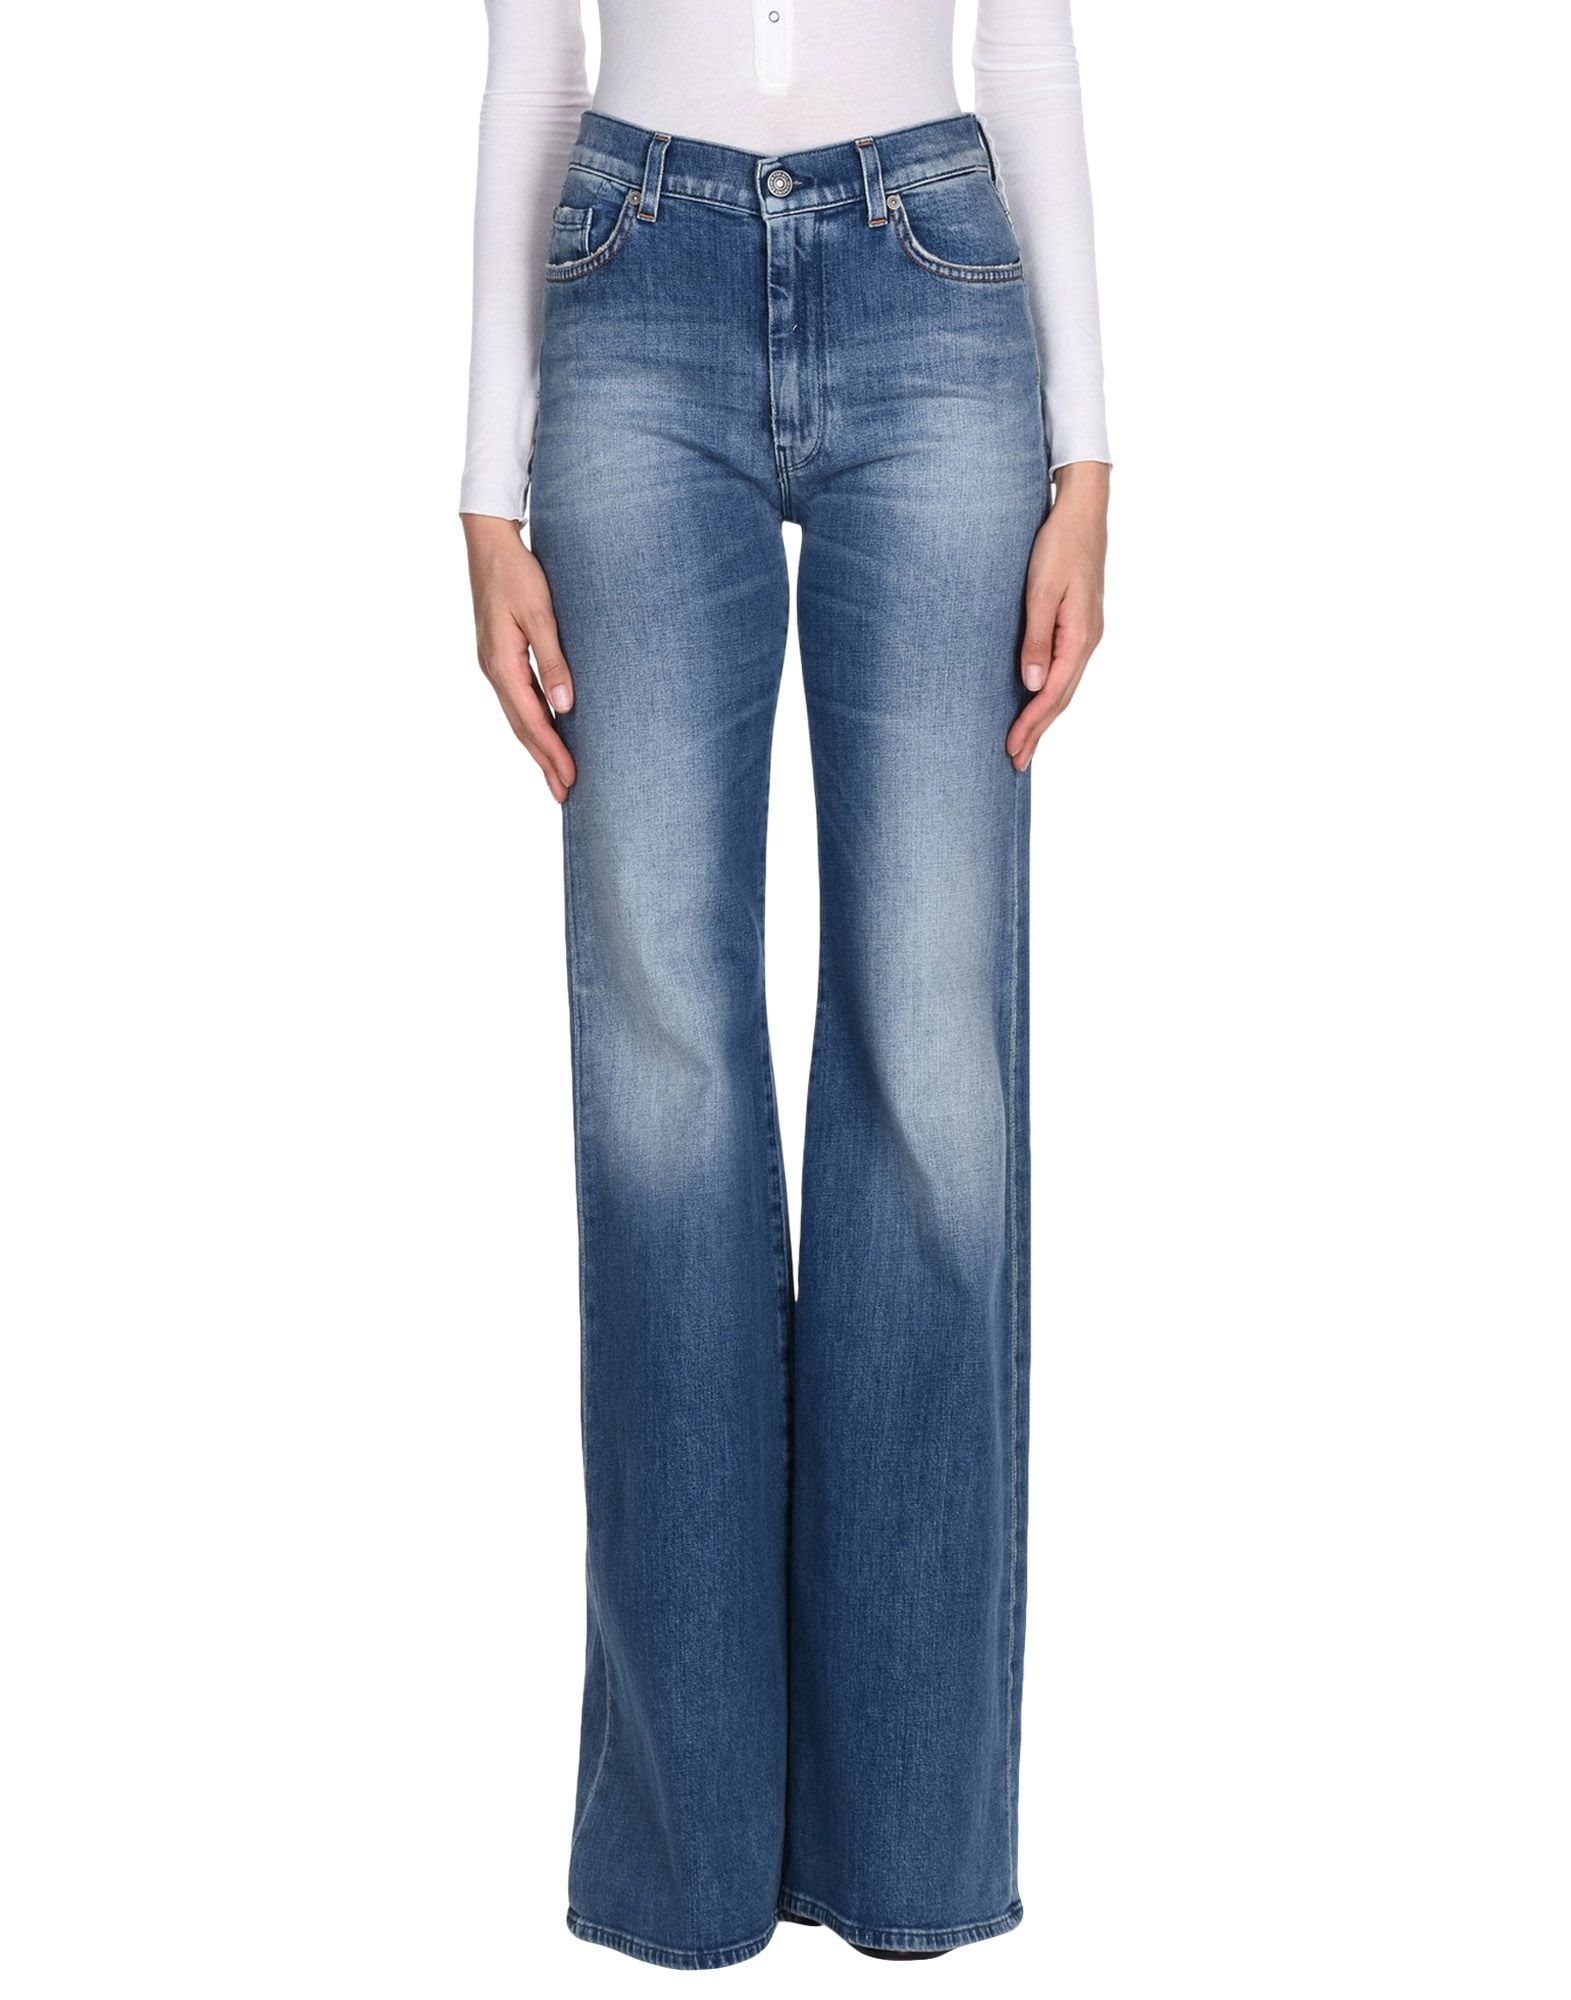 7 FOR ALL MANKIND Denim pants,42664233PV 3